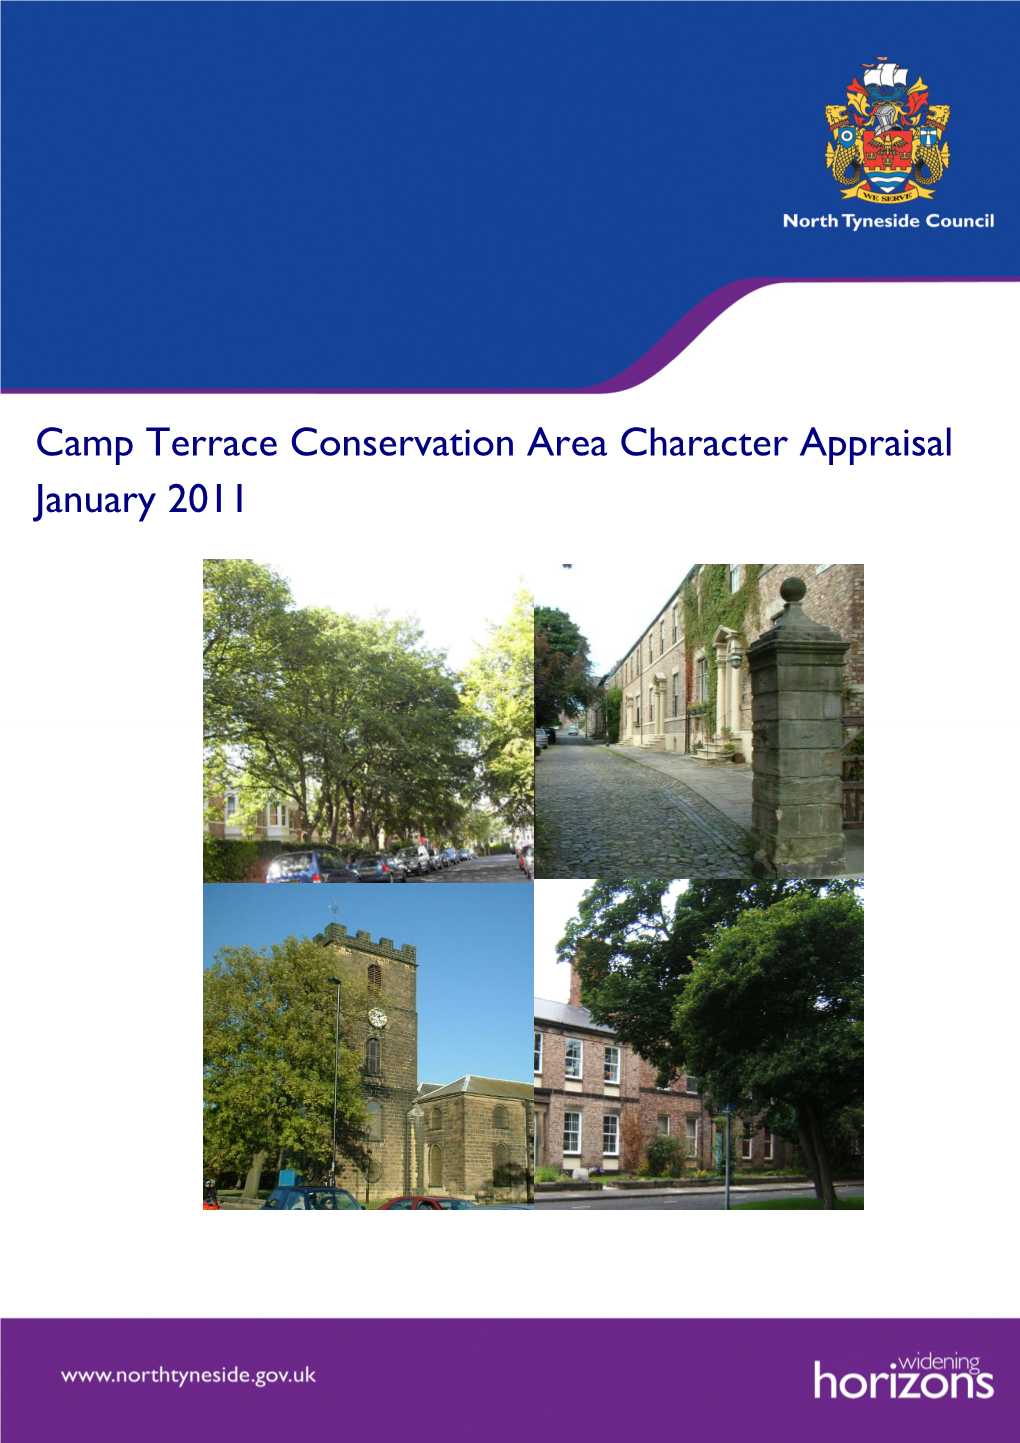 Camp Terrace Conservation Area Character Appraisal January 2011